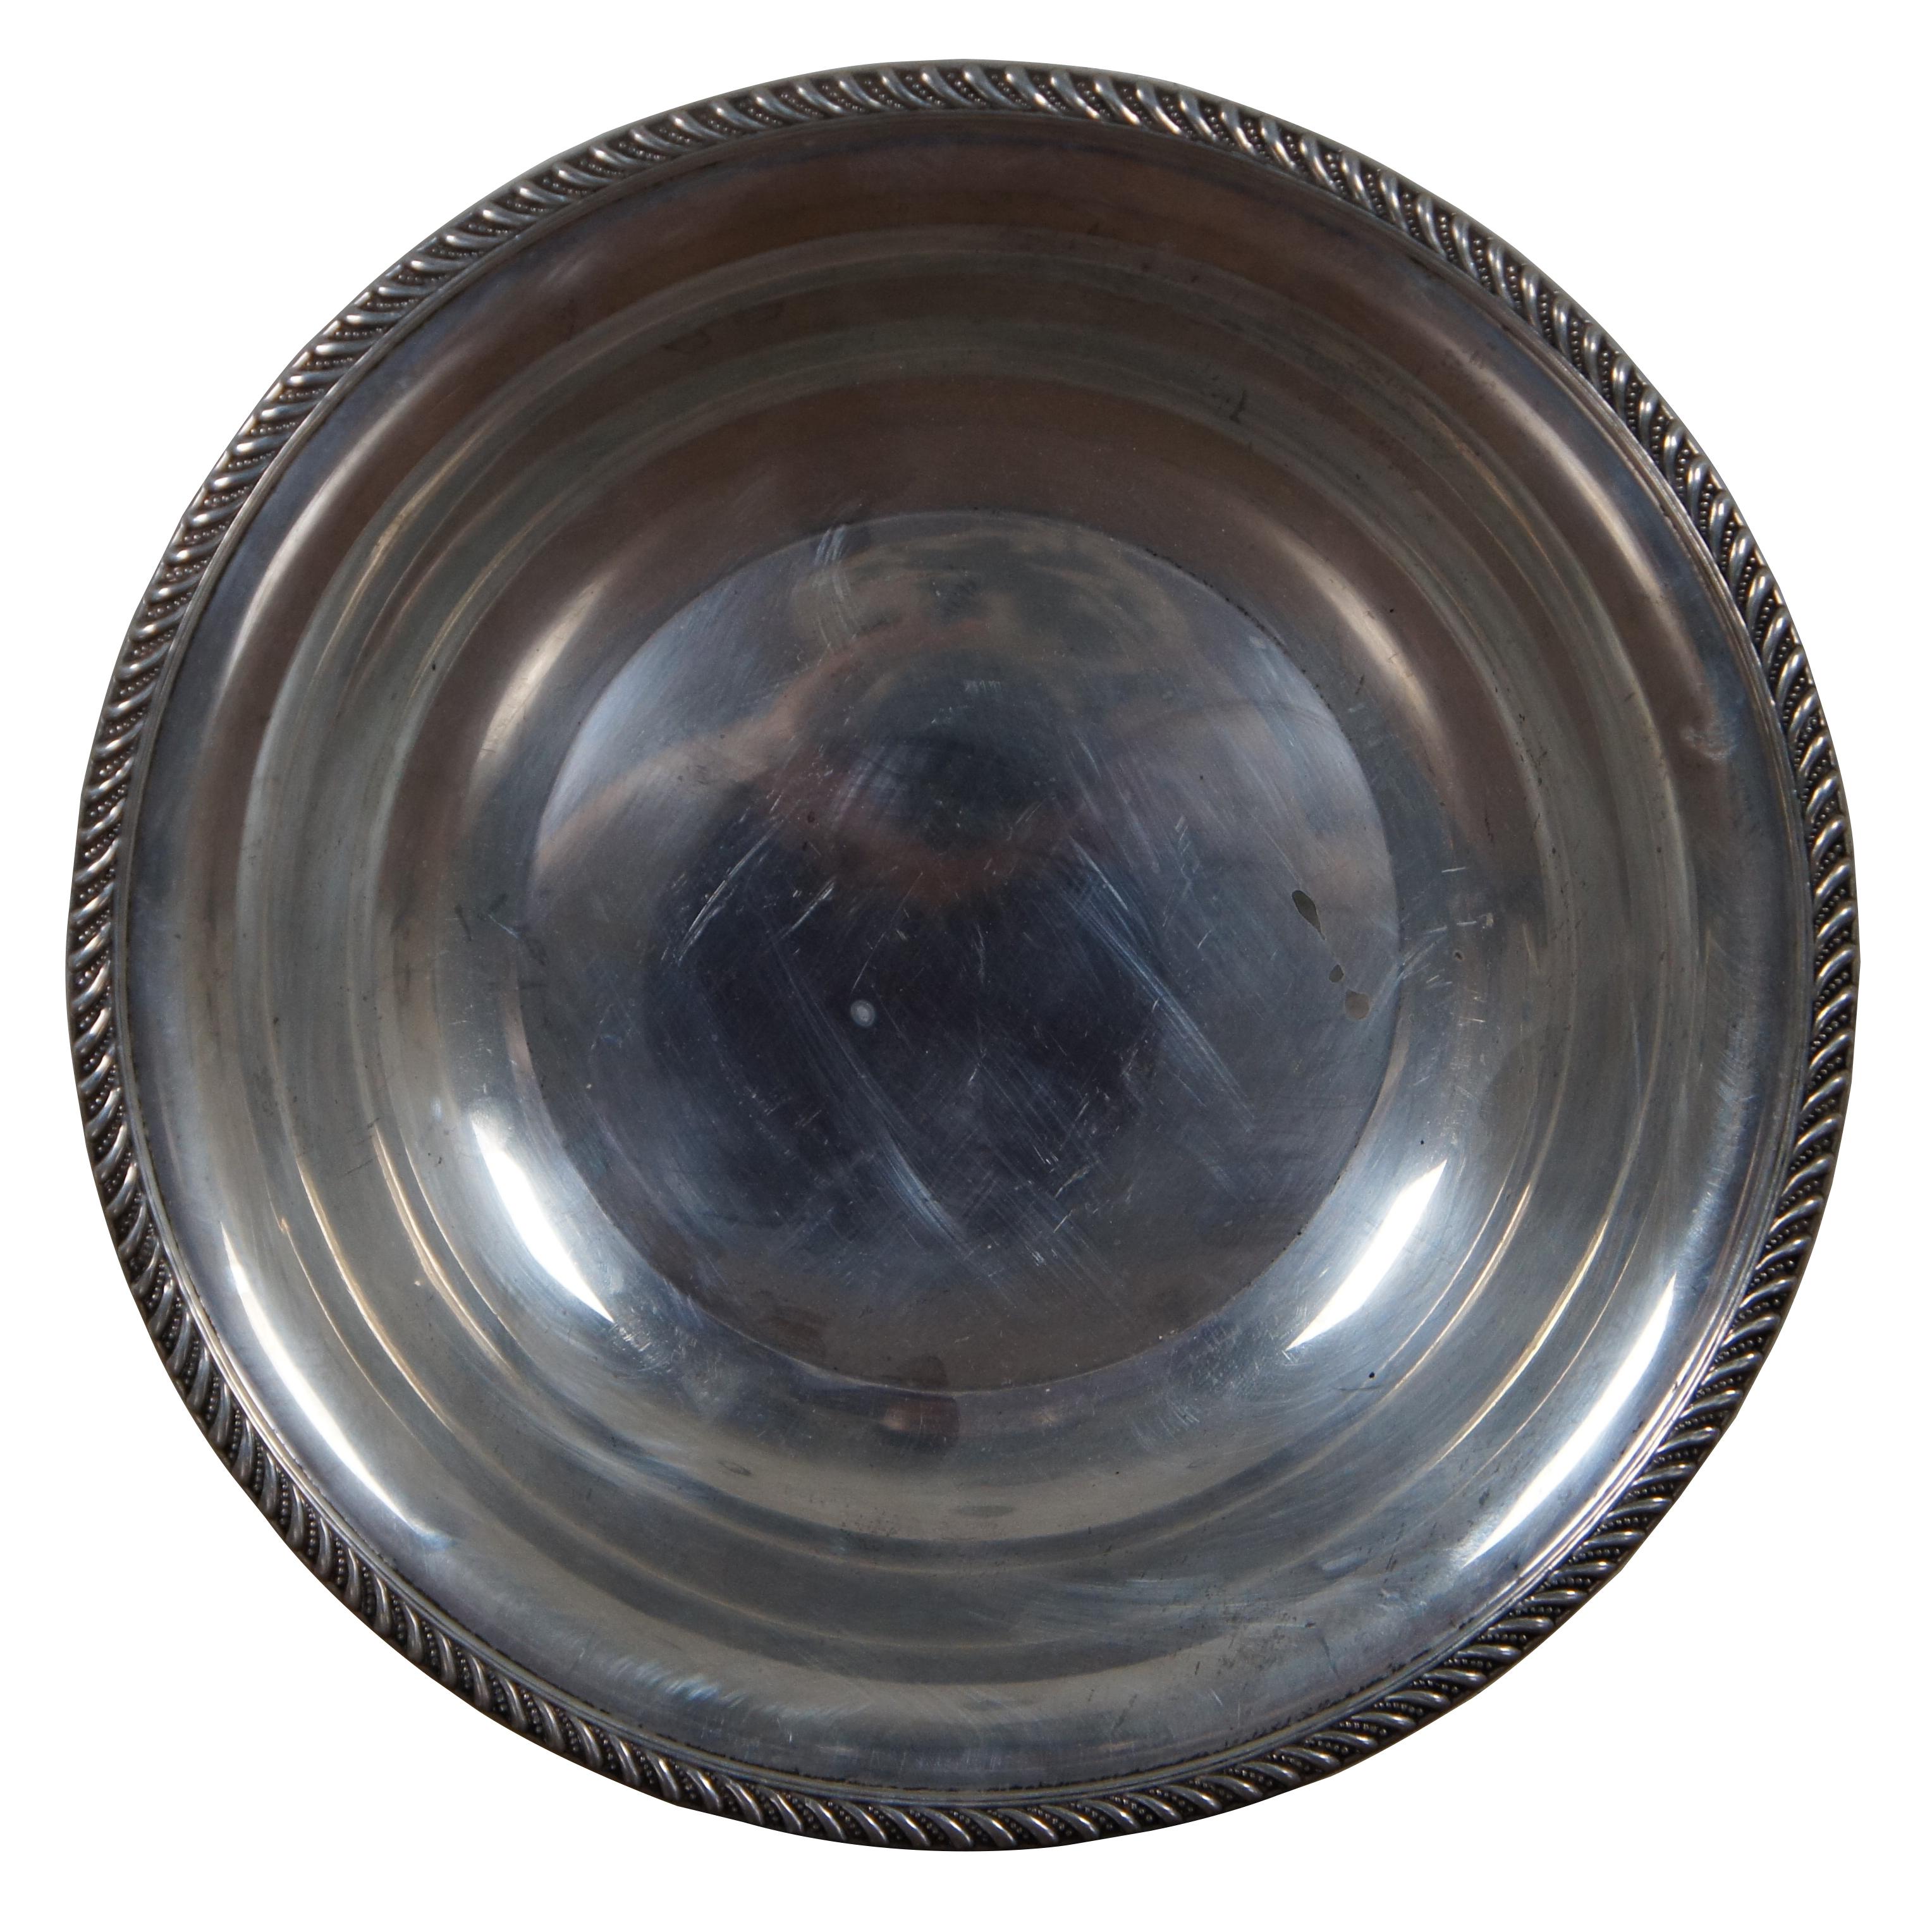 Mid-20th century Preisner sterling silver serving bowl with Gadrooning edge.

“PREISNER SILVER COMPANY - Wallingford, CT - Active since 1935.”